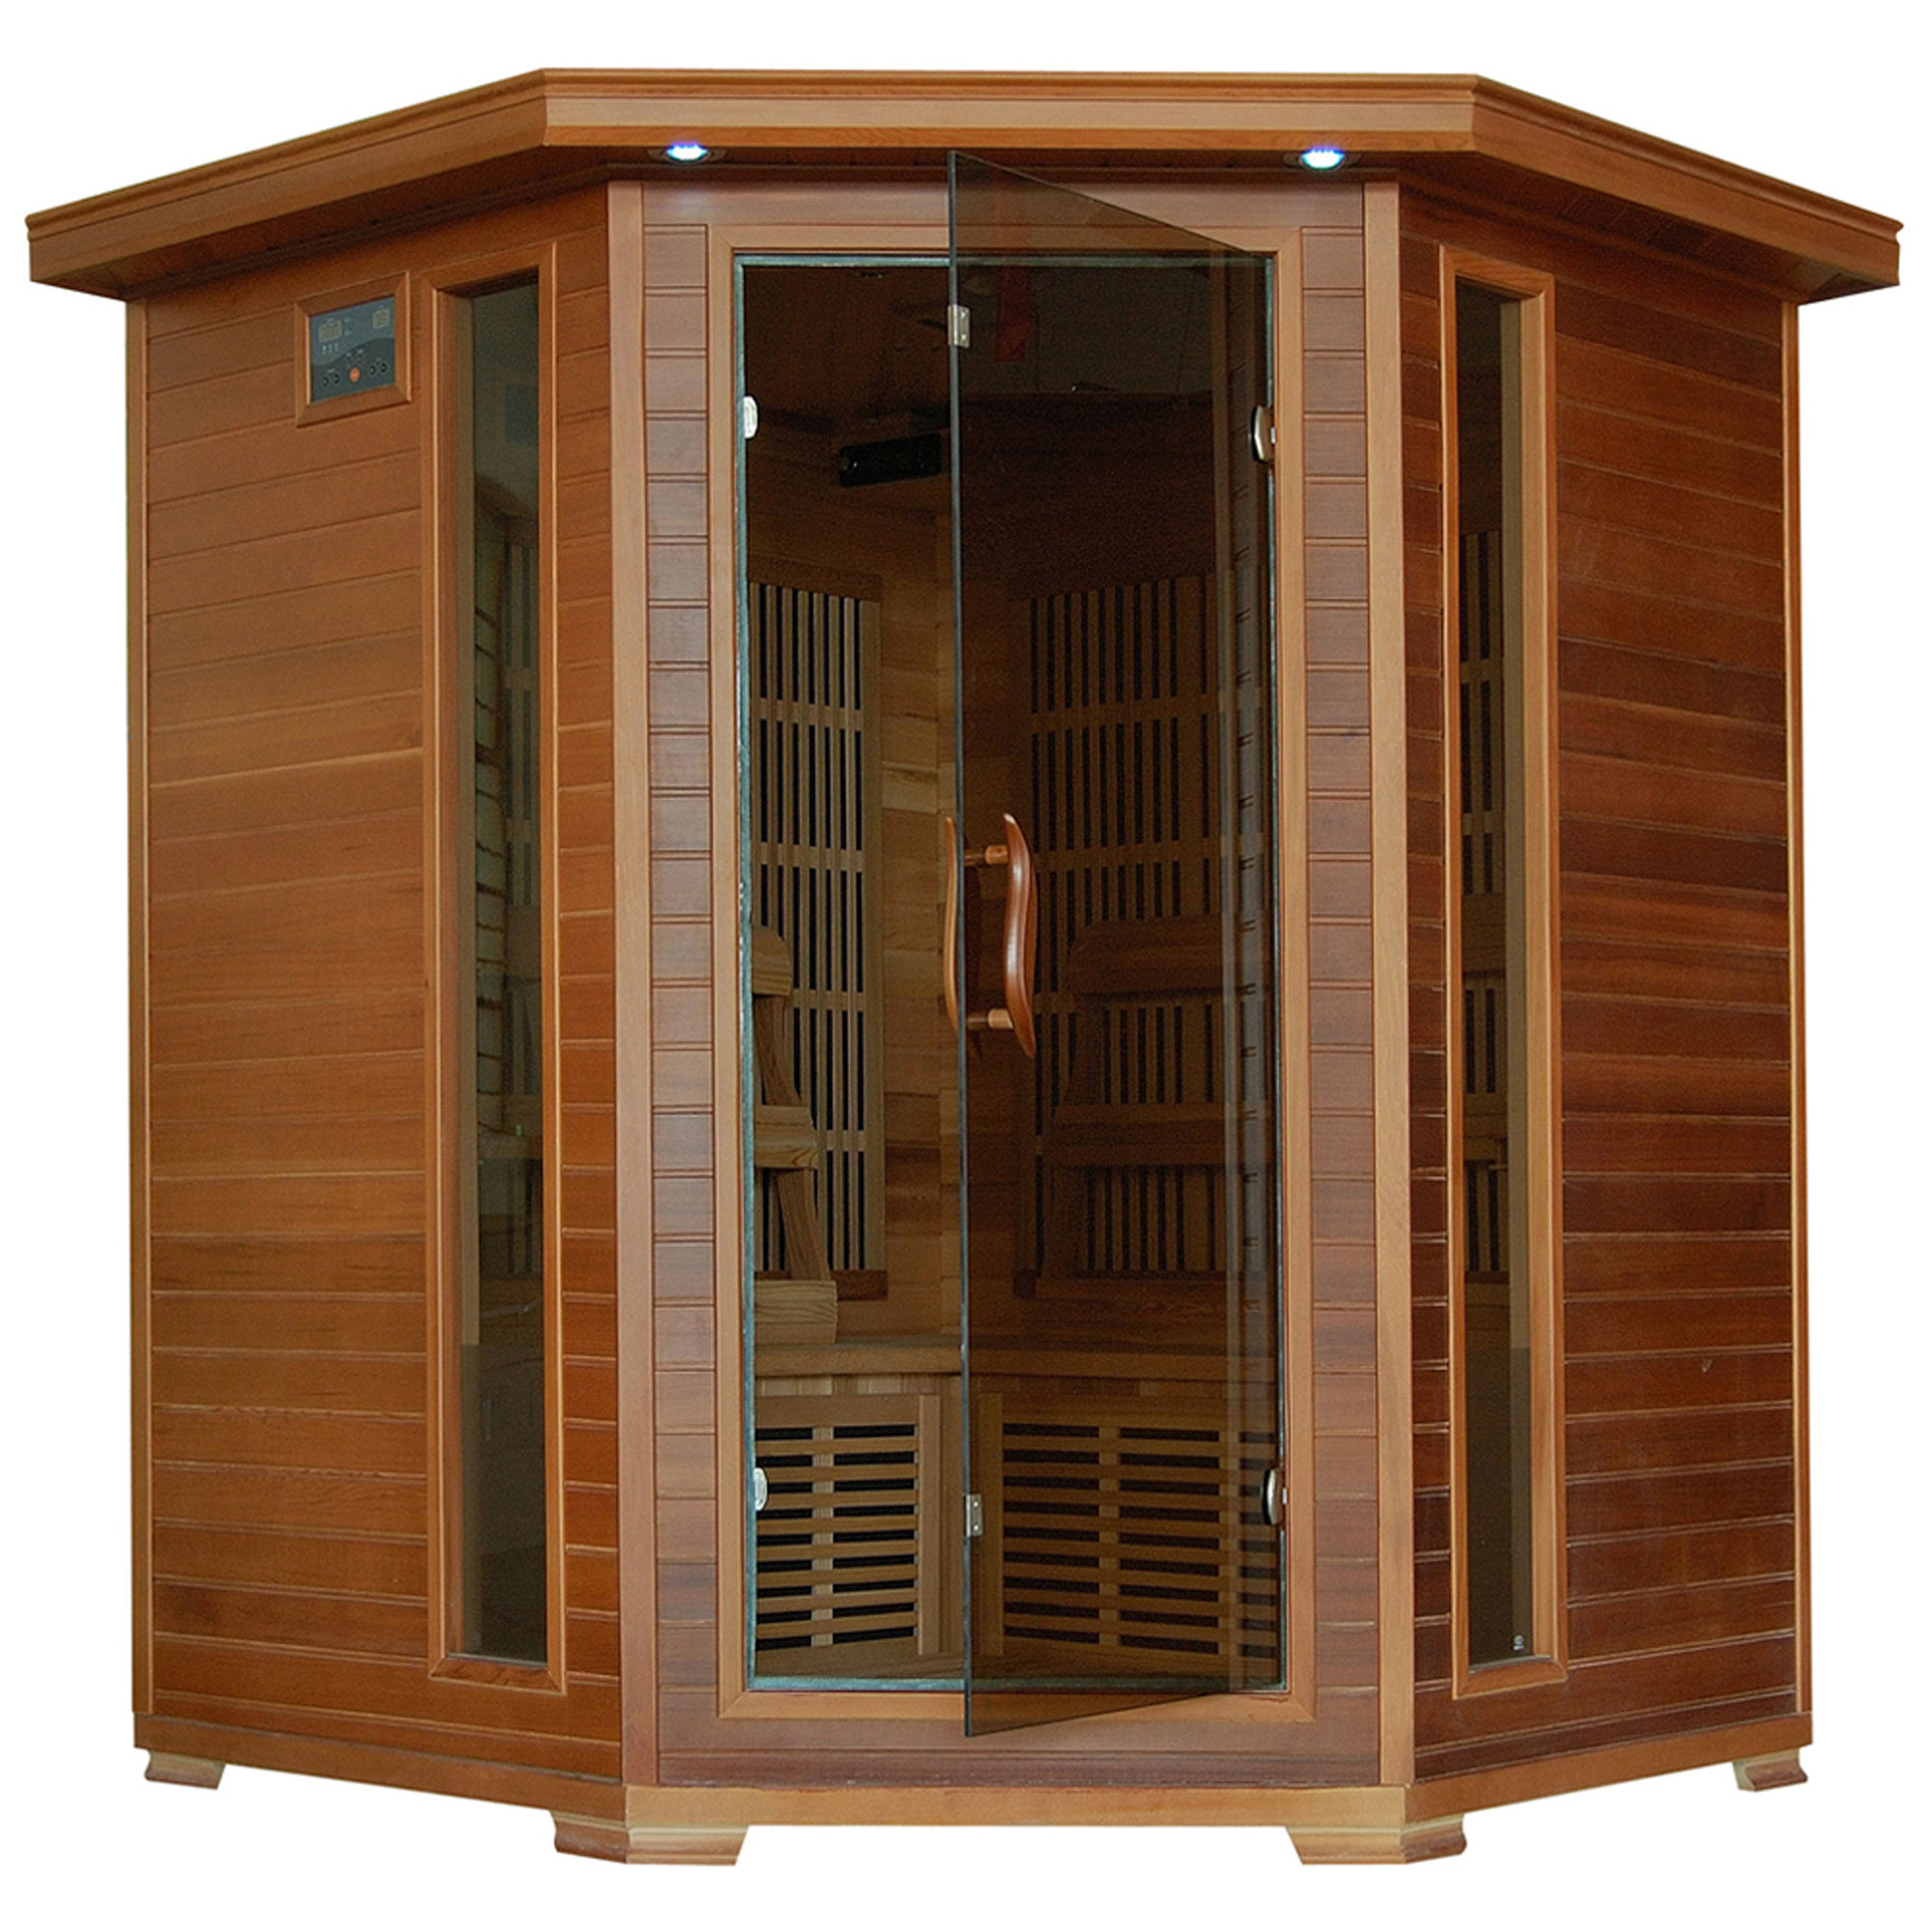 PREMIUM CEDAR SAUNA THERMOMETER BEST QUALITY AND FREE SHIPPING! 